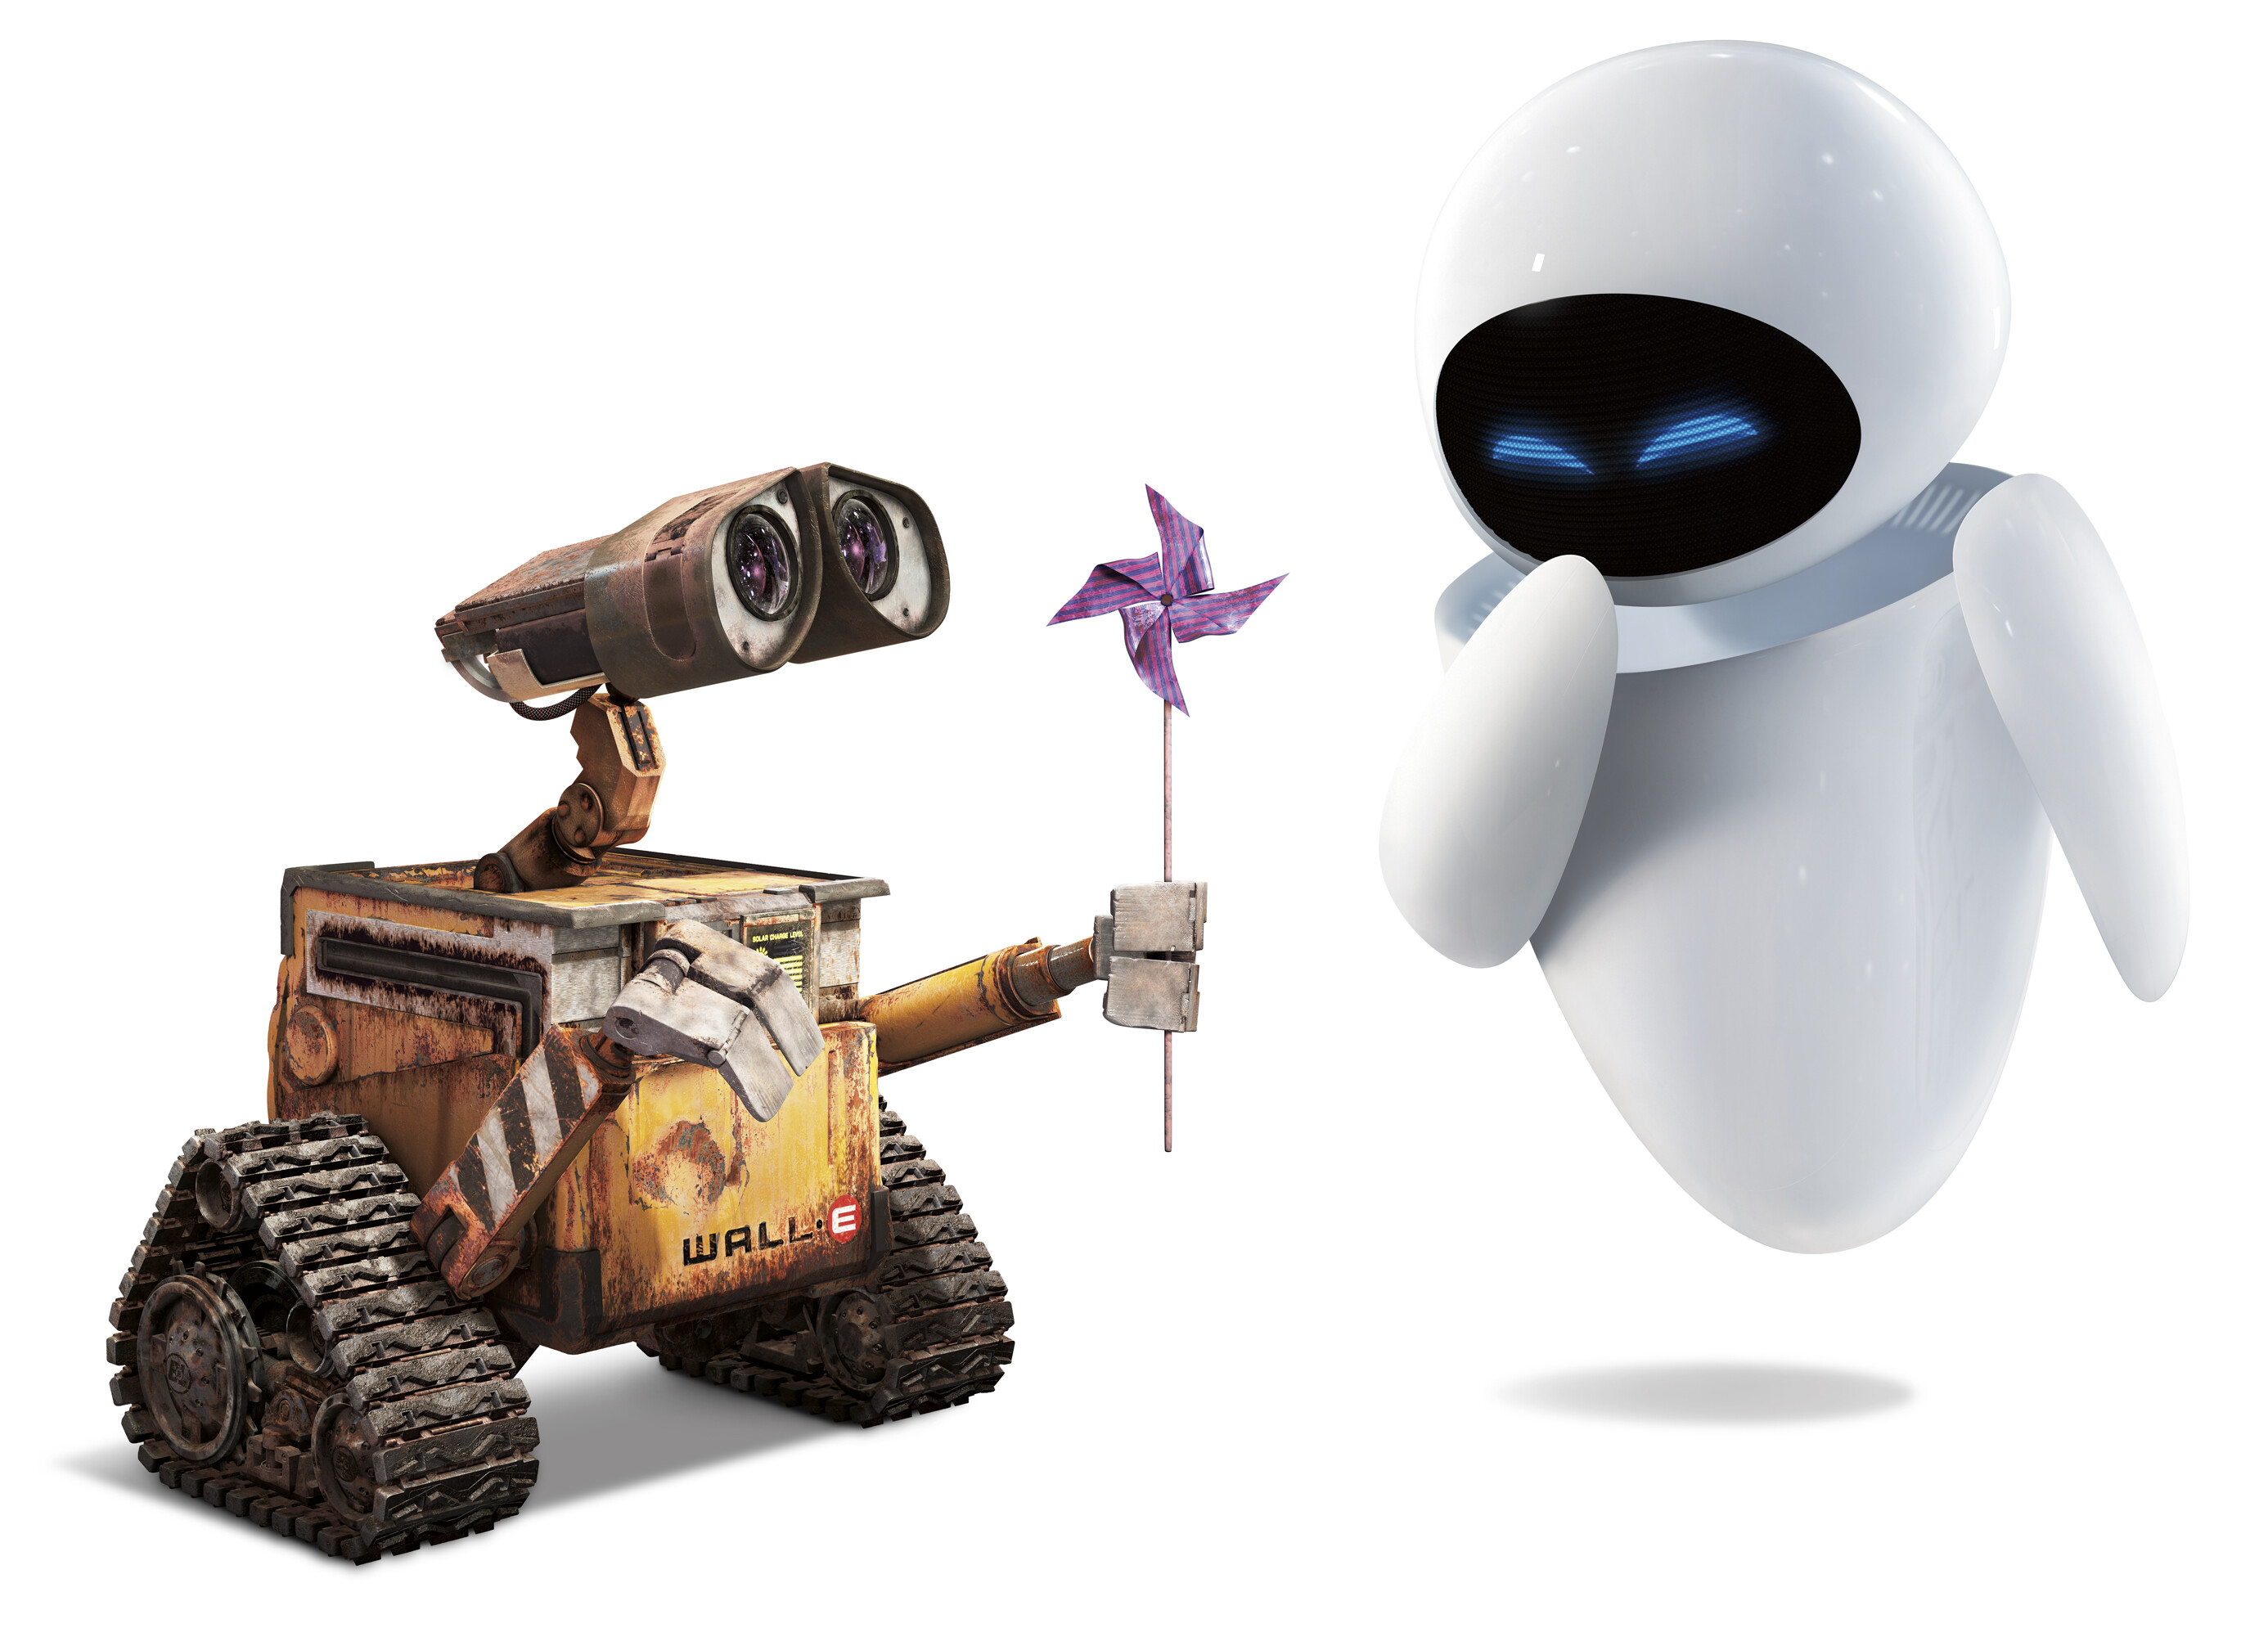 WALL·E: The story follows a solitary robot on a future, uninhabitable, deserted Earth in 2805, left to clean up the garbage, He is visited by a probe sent by the starship Axiom, a robot called EVE, with whom he falls in love and pursues across the galaxy. 2780x1990 HD Background.